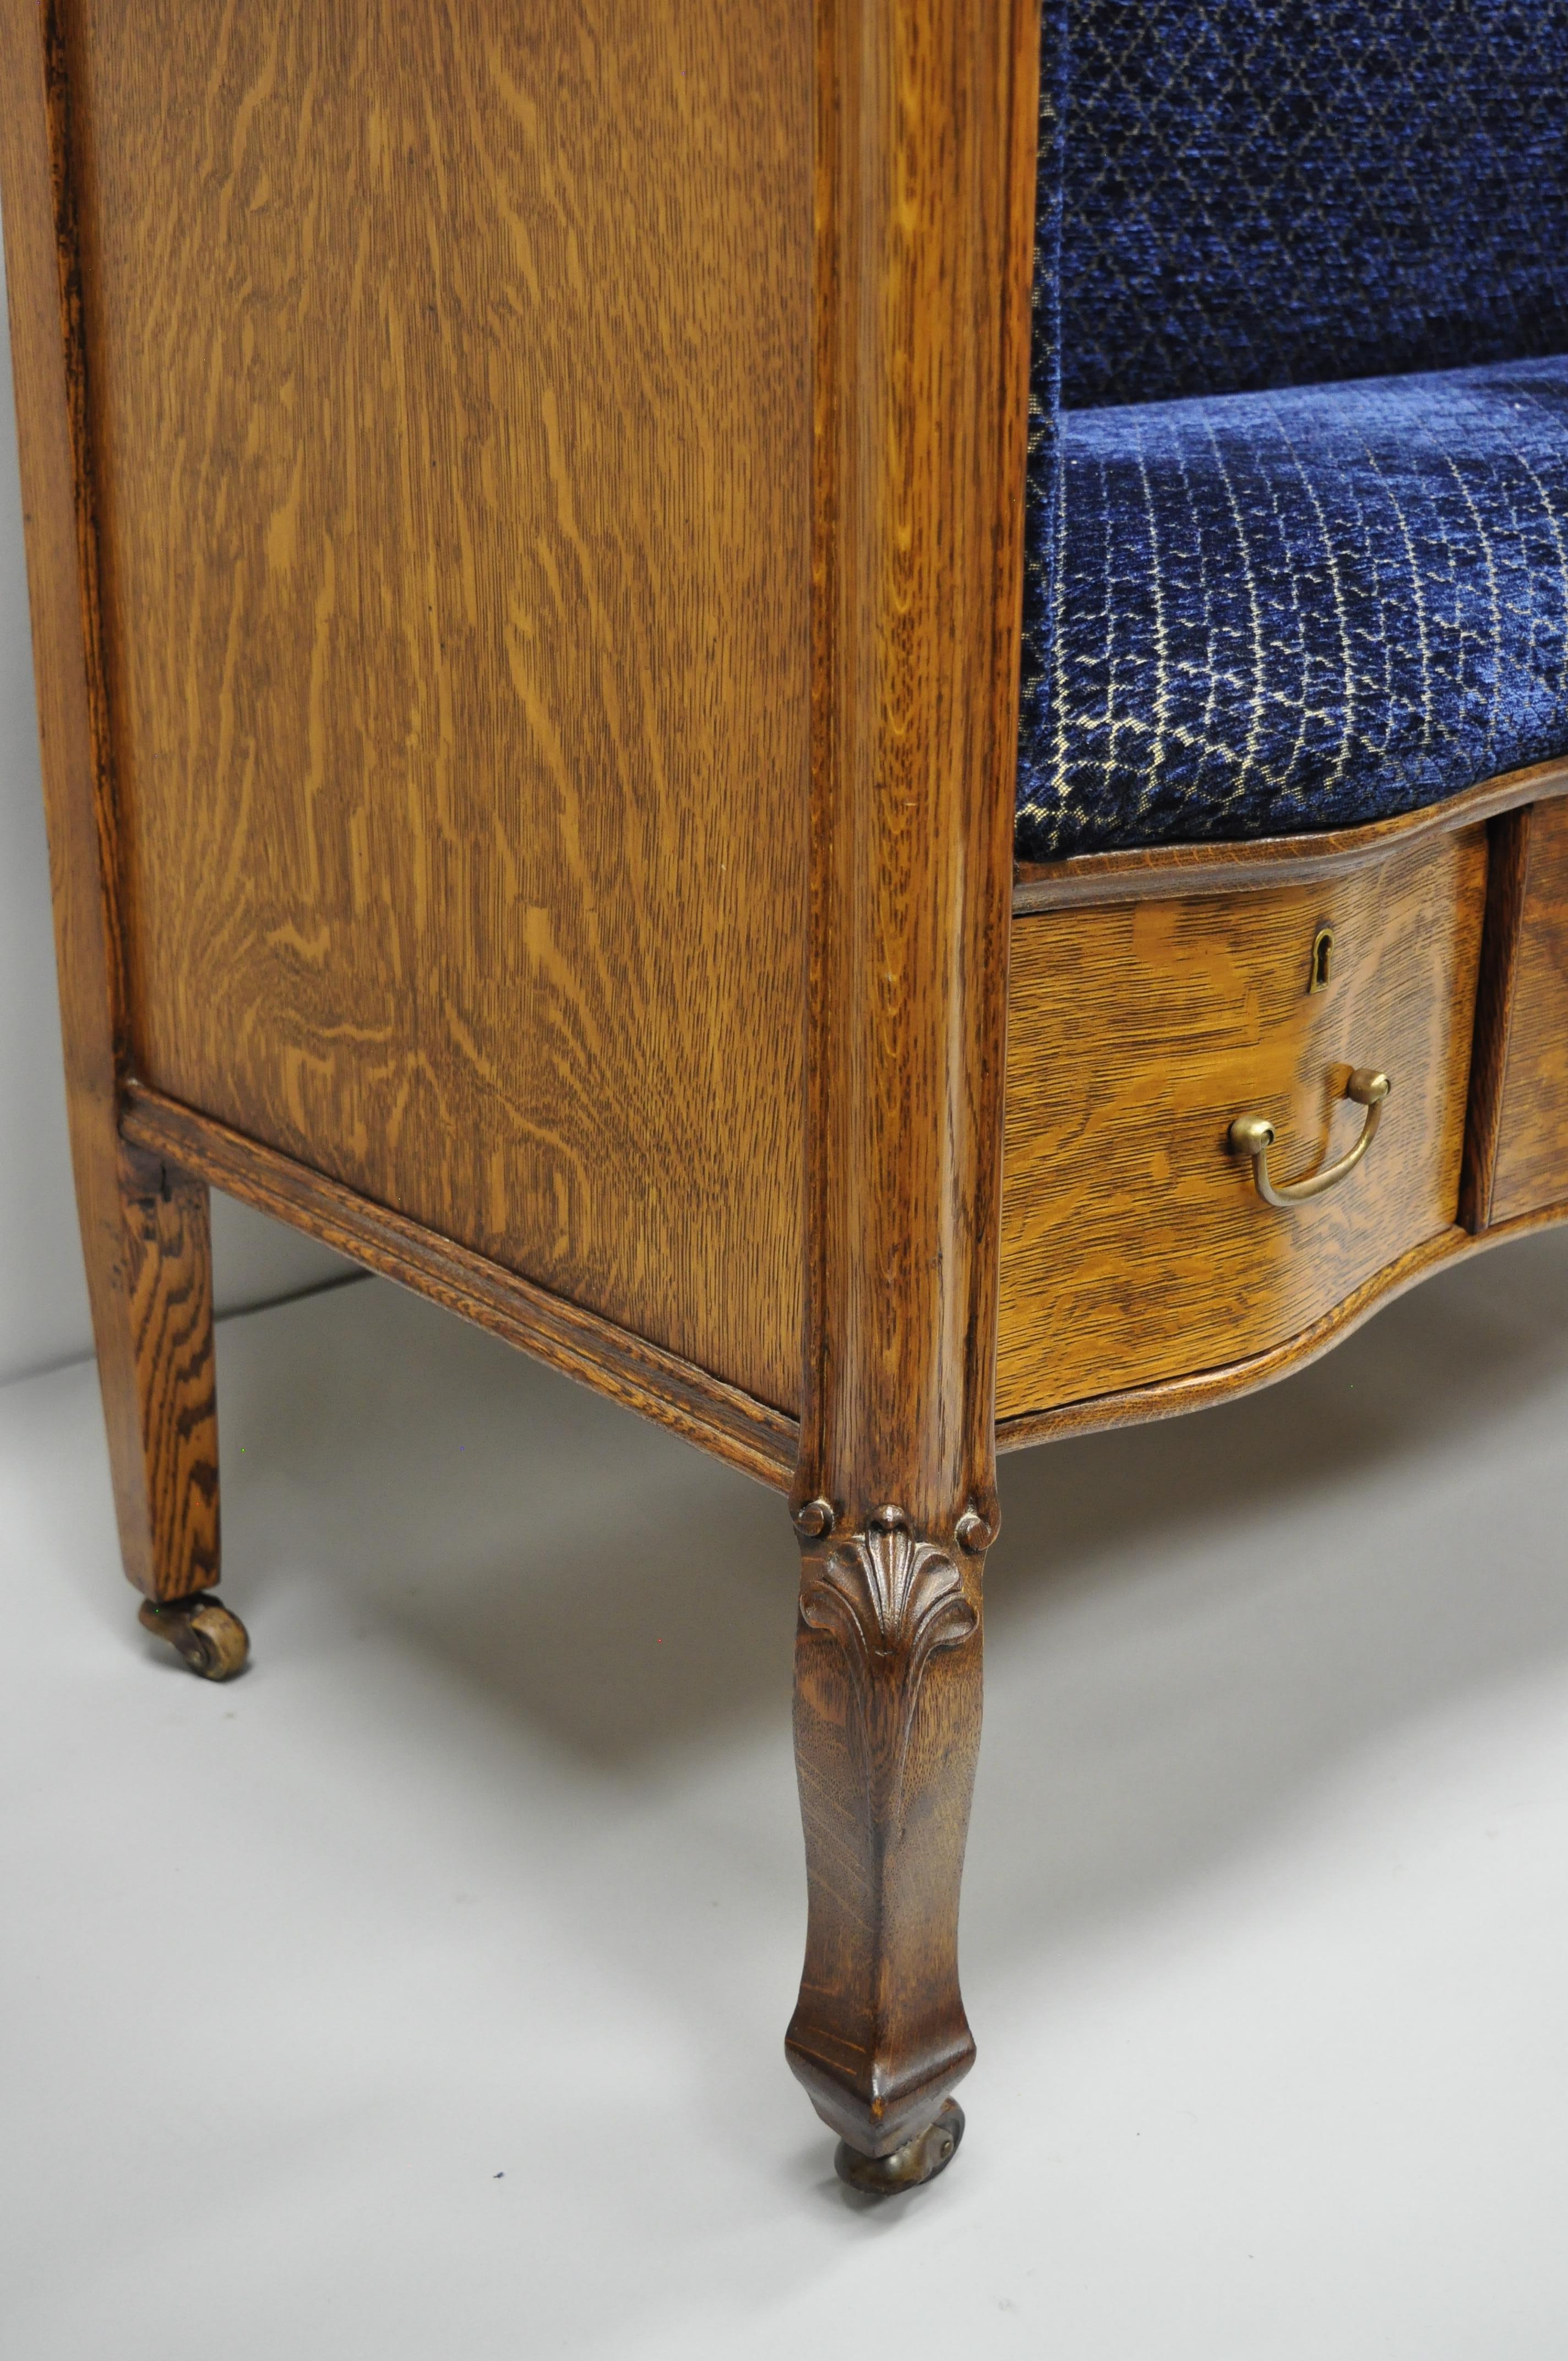 Fabric Victorian Golden Tiger Oak Dresser Chest Re-Purposed to Upholstered Entry Bench